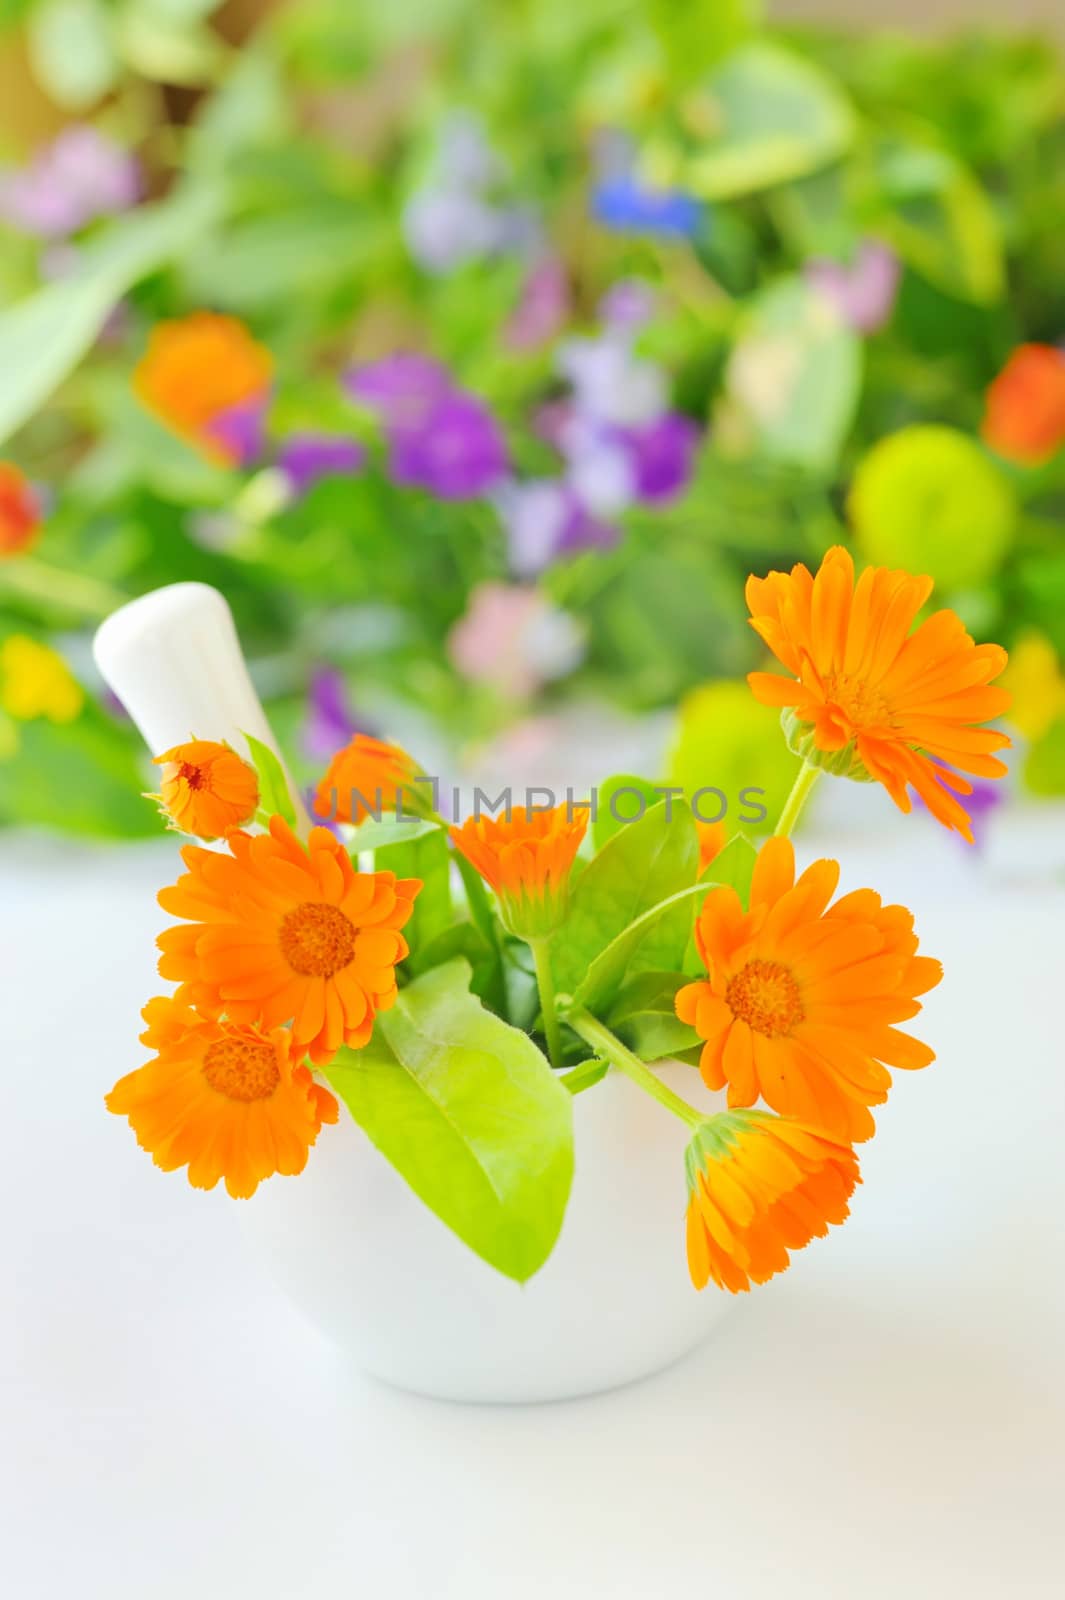 Calendula flowers and mortar by mady70